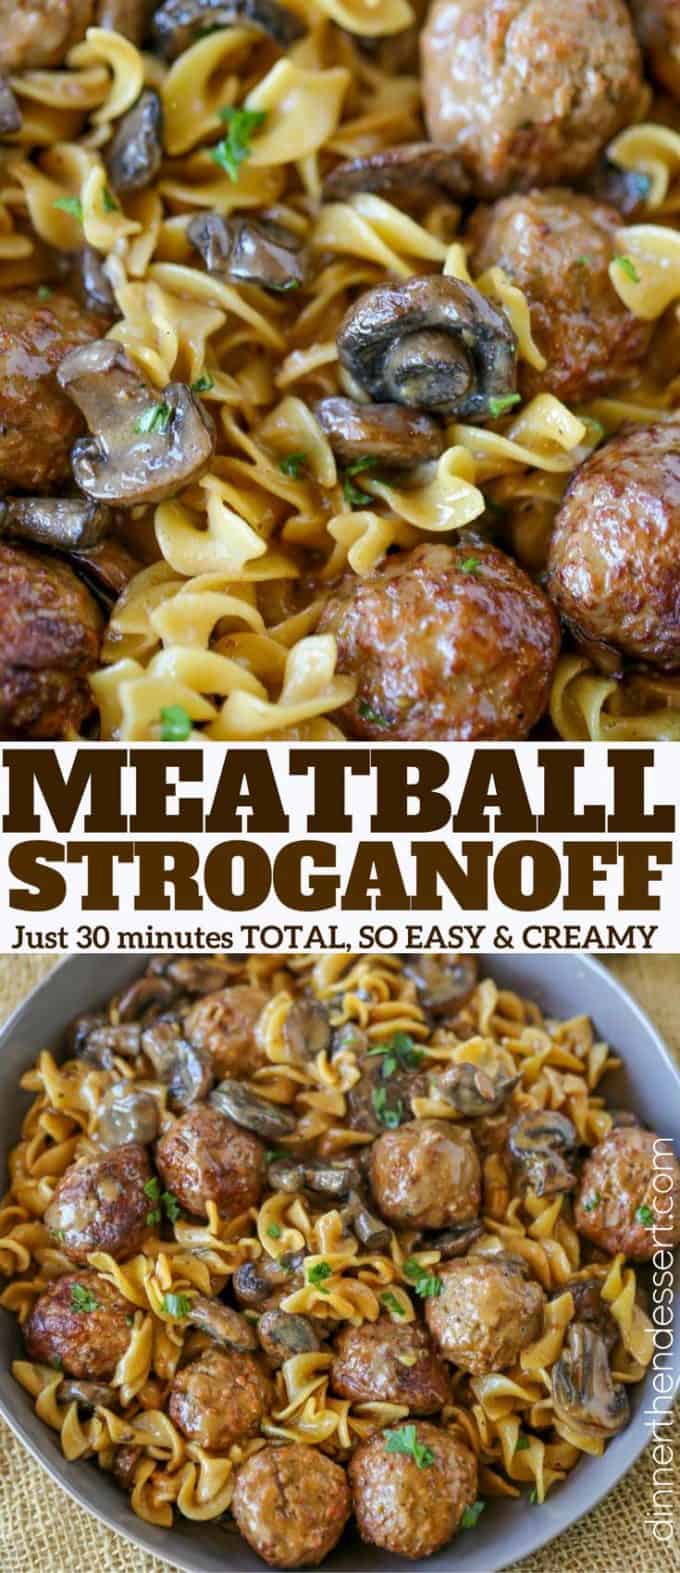 Quick and EASY Meatball Stroganoff in just 30 minutes with a creamy sour cream mushroom gravy, egg noodles and meatballs, it's the perfect weeknight meal!